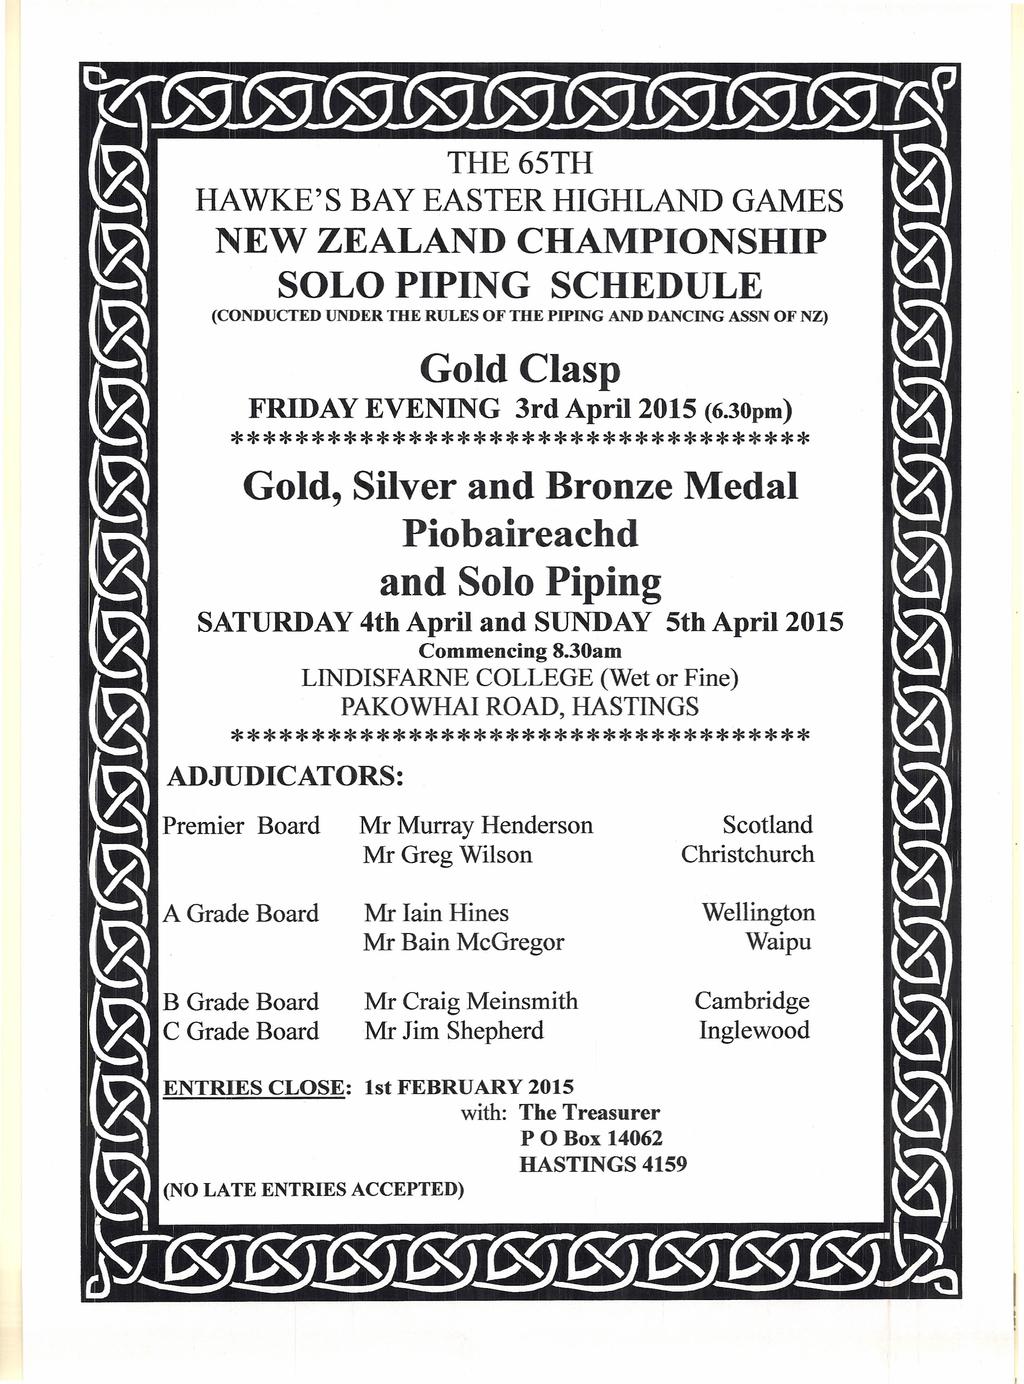 THE 65TH HAWKE'S BAY EASTER HIGHLAND GAMES NEW ZEALAND CHAMPIONSHIP SOLO PIPING SCHEDULE (CONDUCTED UNDER THE RULES OF THE PIPING AND DANCING ASSN OF NZ) FRIDAY EVENING Gold Clasp 3rd April 2015 (6.